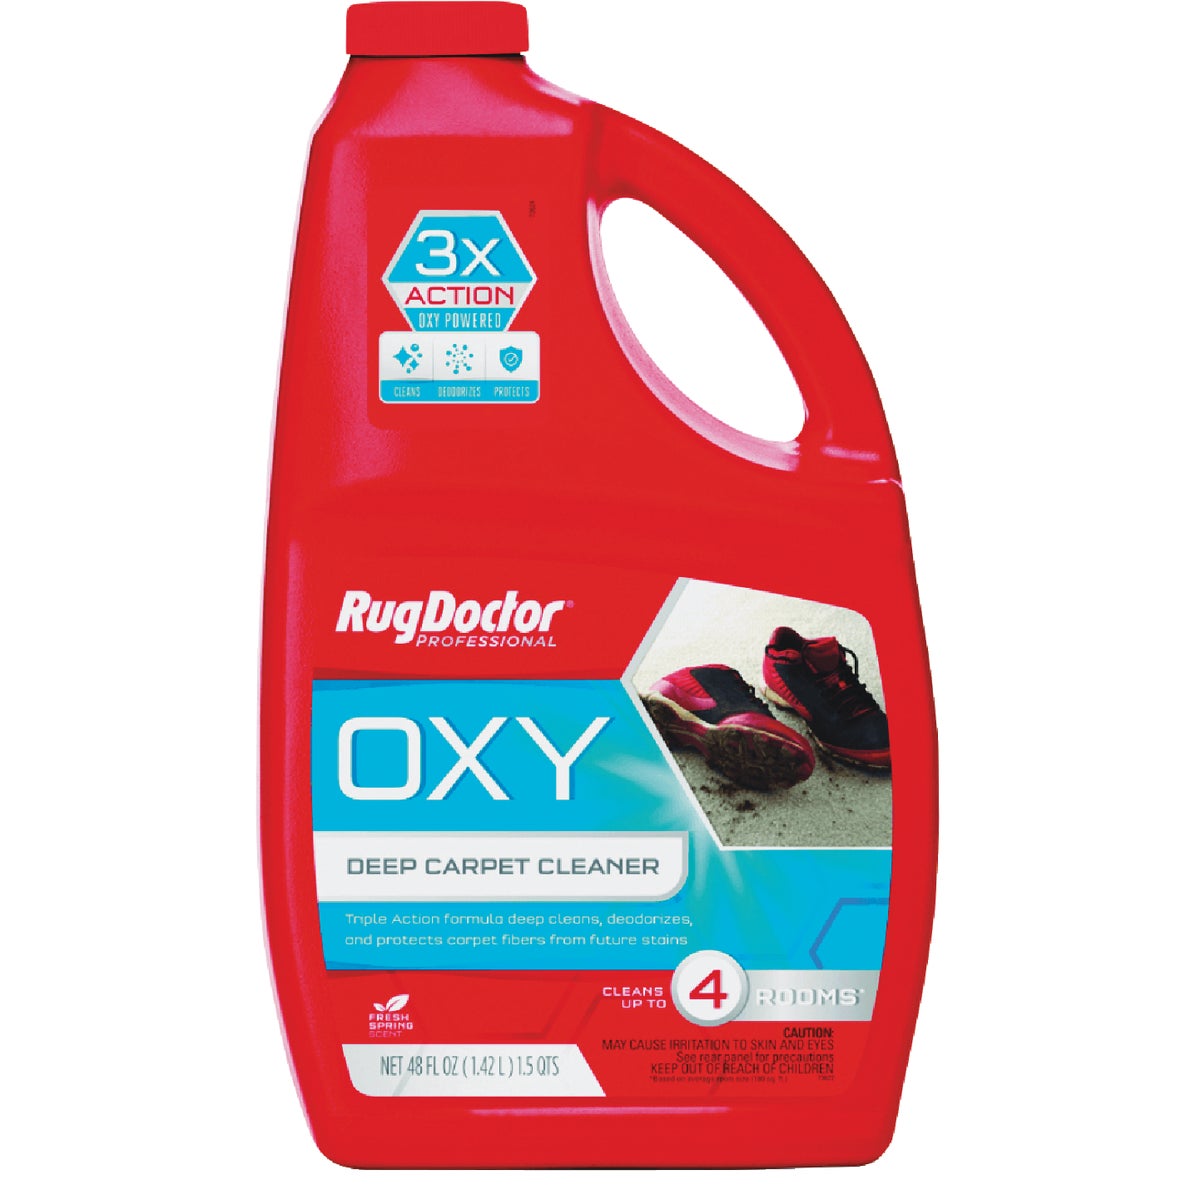 Rug Doctor 48 Oz. Oxy Carpet Cleaner